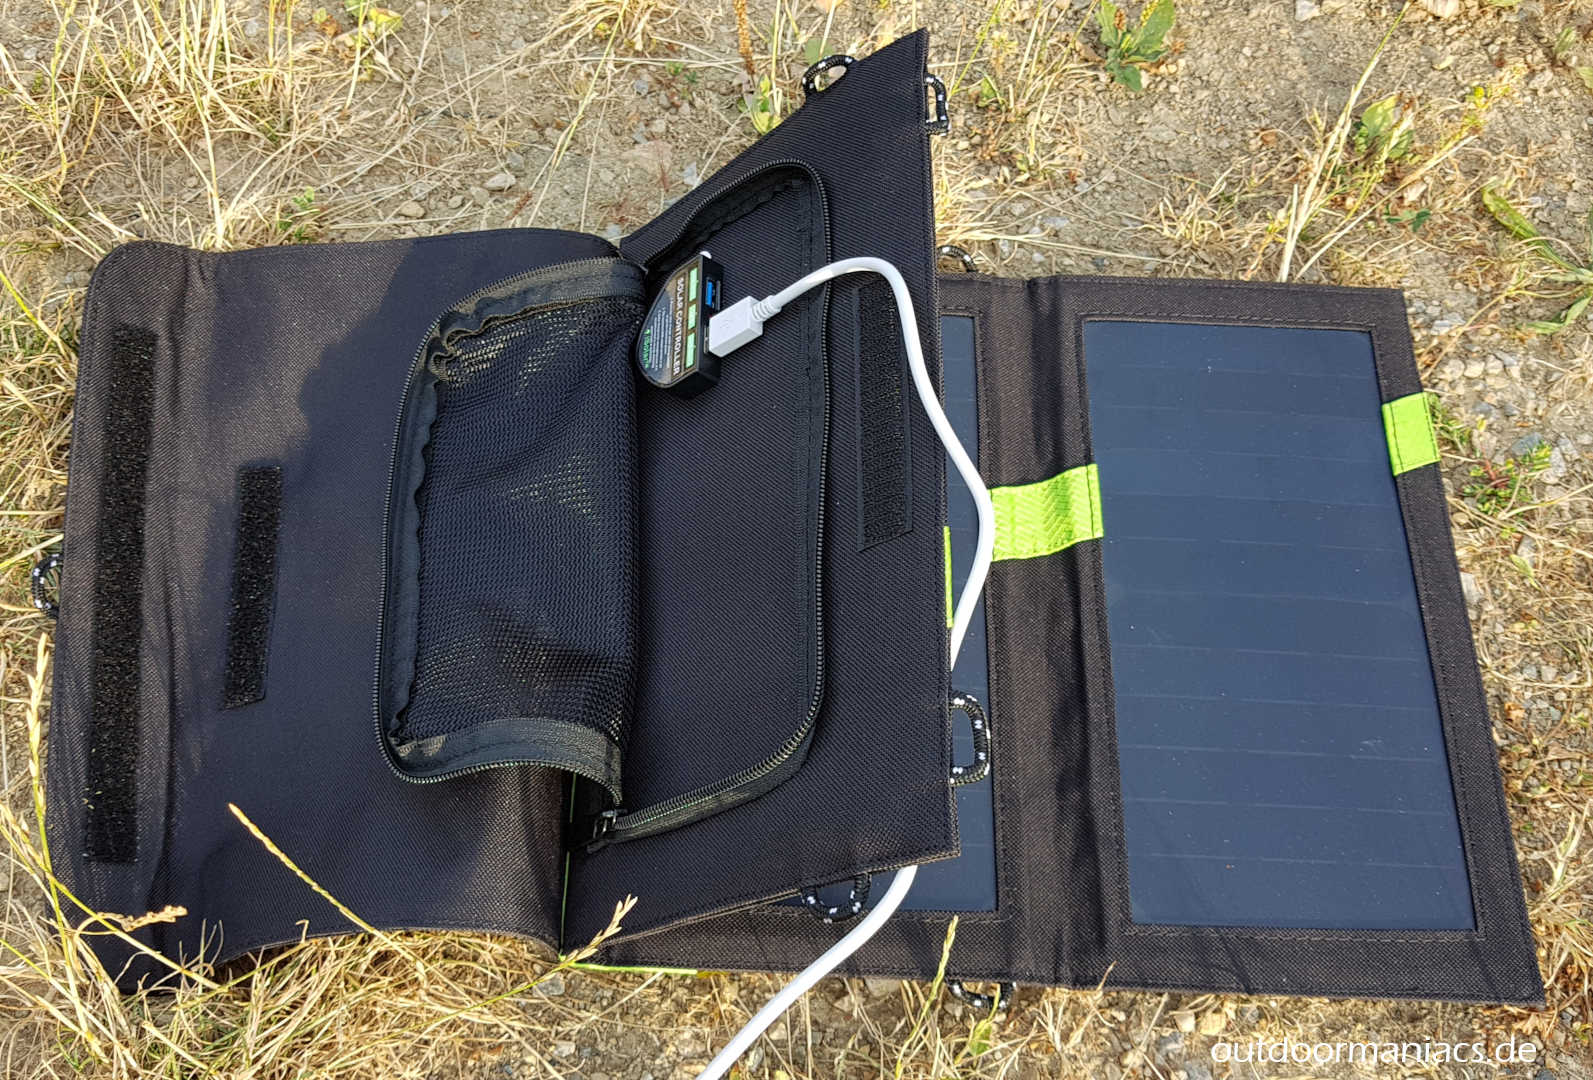 x-dragon solar charger review